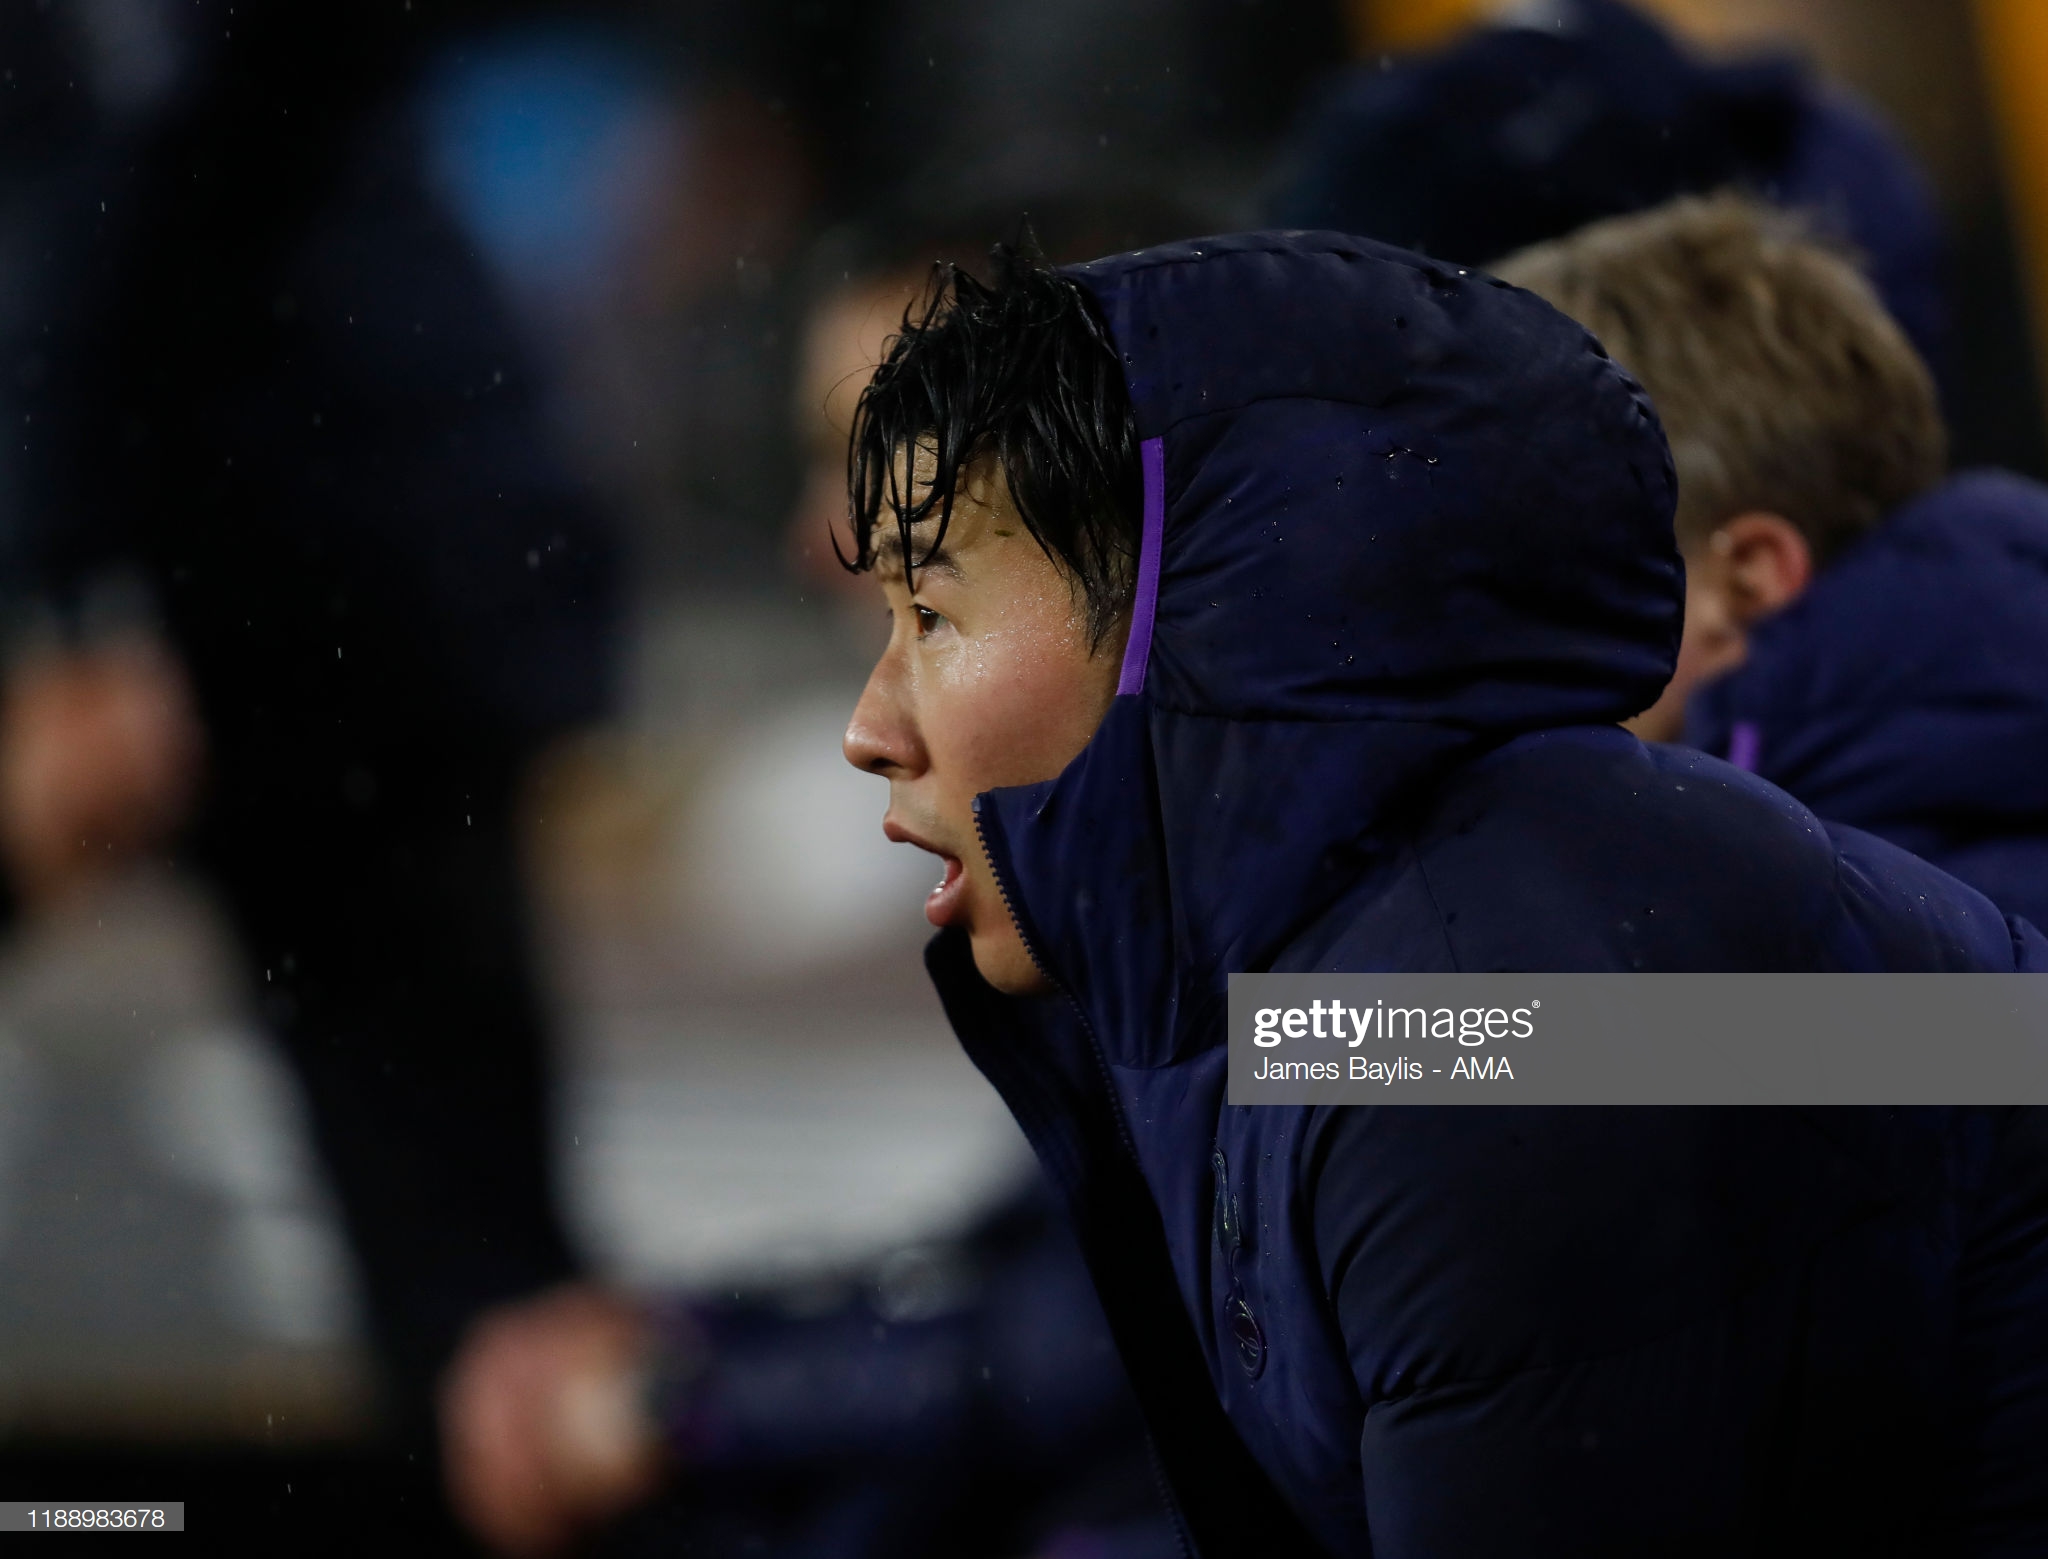 gettyimages-1188983678-2048x2048.jpg